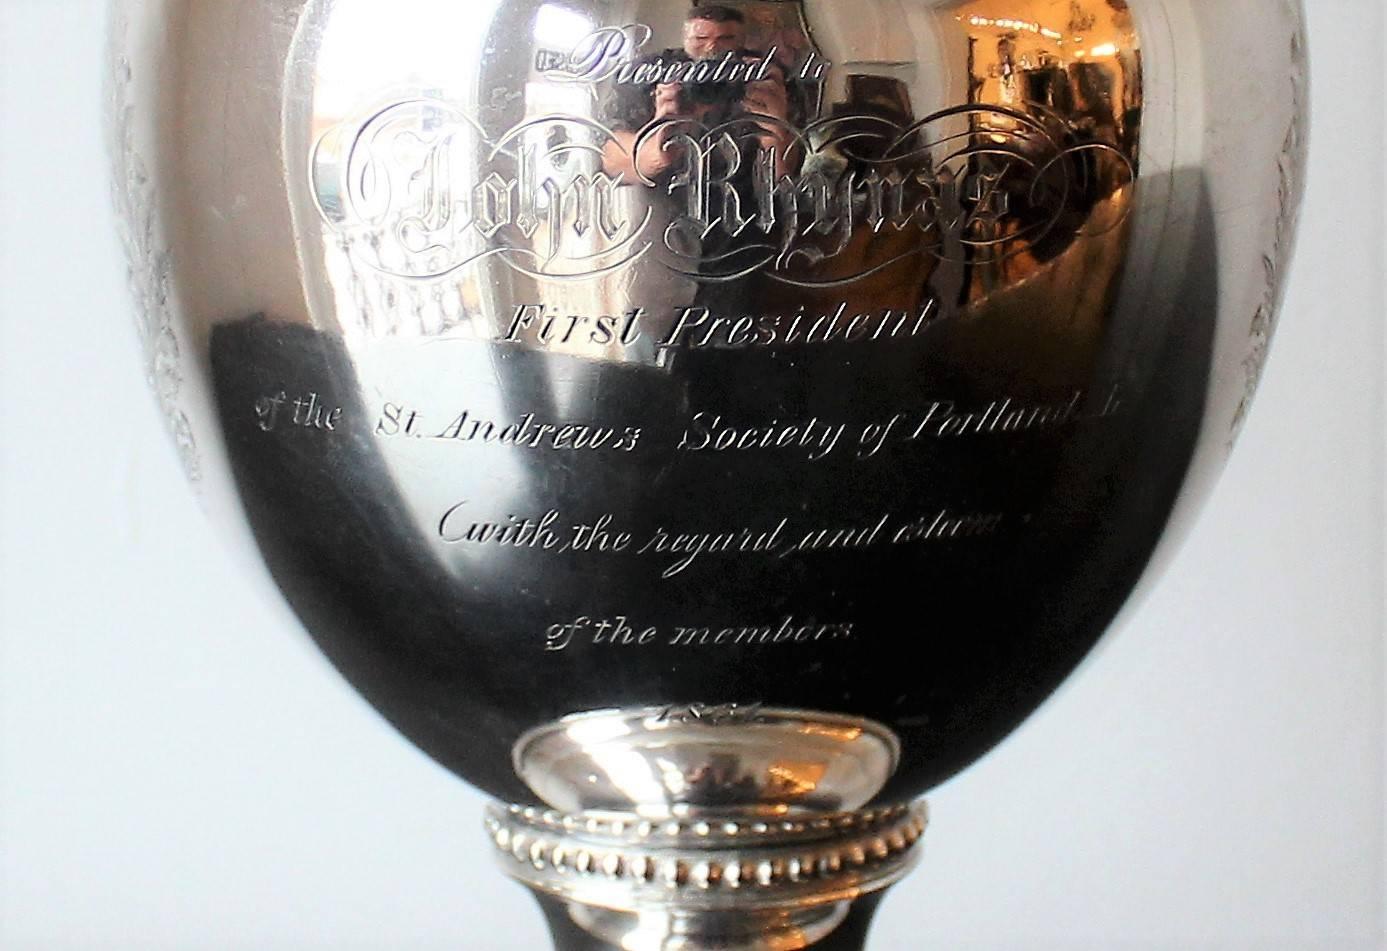 19th century American coin silver presentation pitcher made by Newell Harding & Co silversmiths of Boston Massachusetts and presented to the first president of the St. Andrews Society of Portland in 1861. It bears an engraving of the Scottish Royal